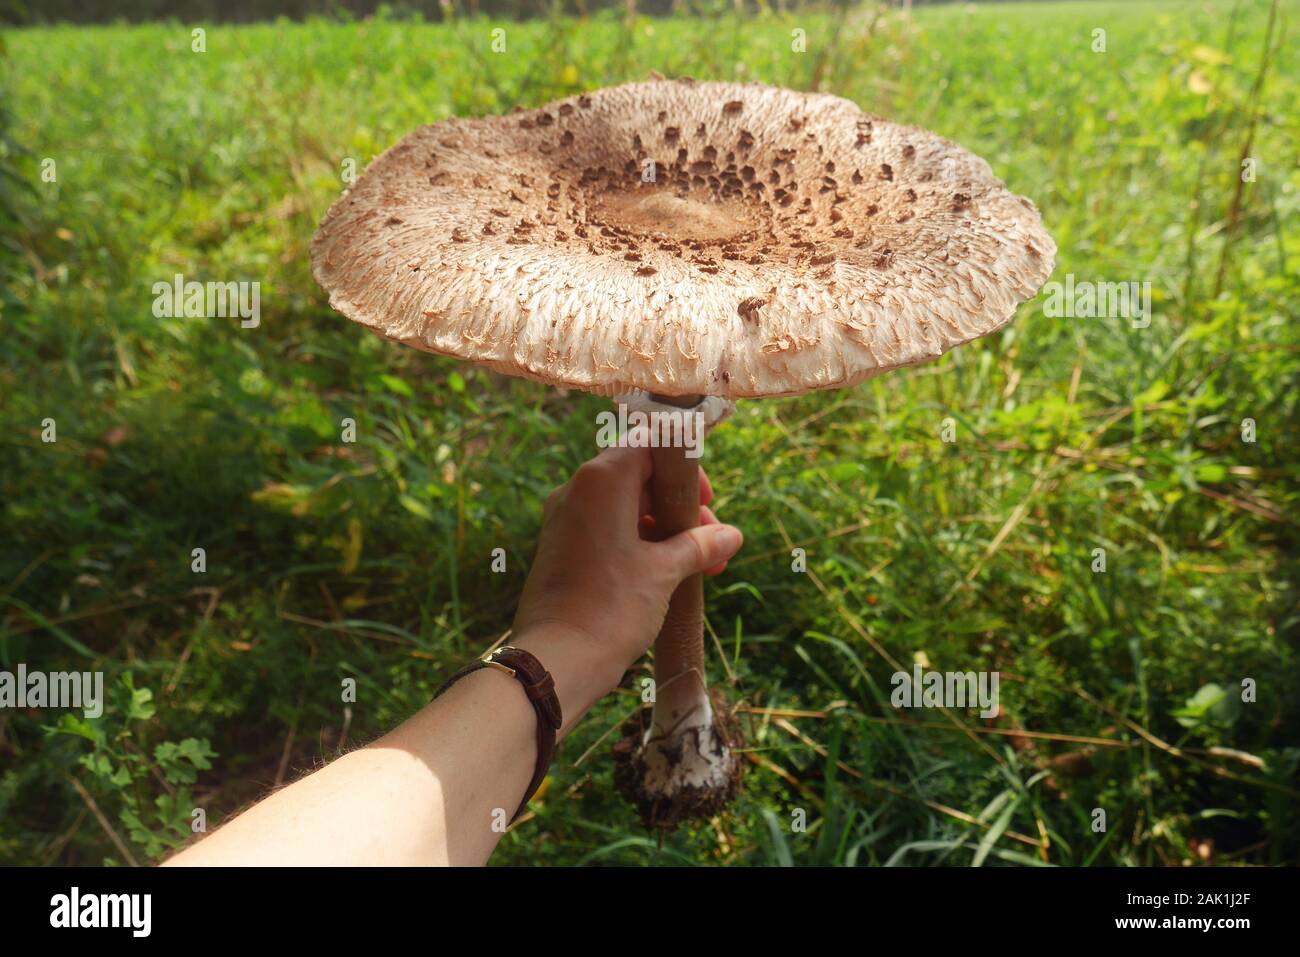 big mushroom in hand (Macrolepiota procera, the parasol mushroom) - mushroom with a large parasol held in hand, on a meadow on a sunny day Stock Photo